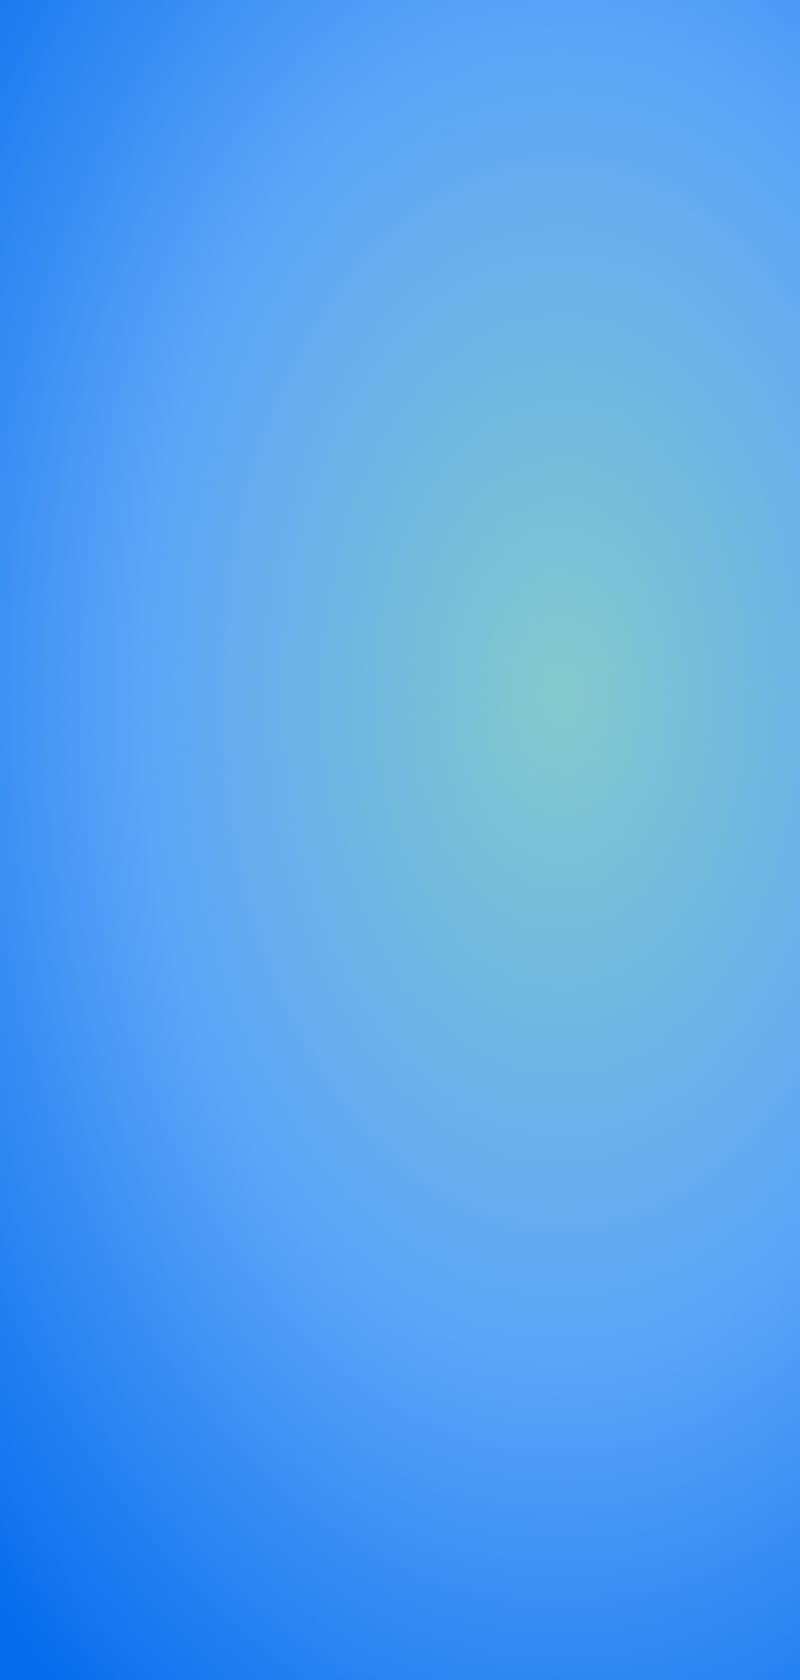 Blue gradient, Aurel, abstract, amoled, android, art, aura, aurora, background, blur, blurry, calm, color, colorful, colors, colours, cool, dark, fresh, ios, minimal, minimalistic, modern, new, nice, oled, quality, simple, wallpapper, HD phone wallpaper